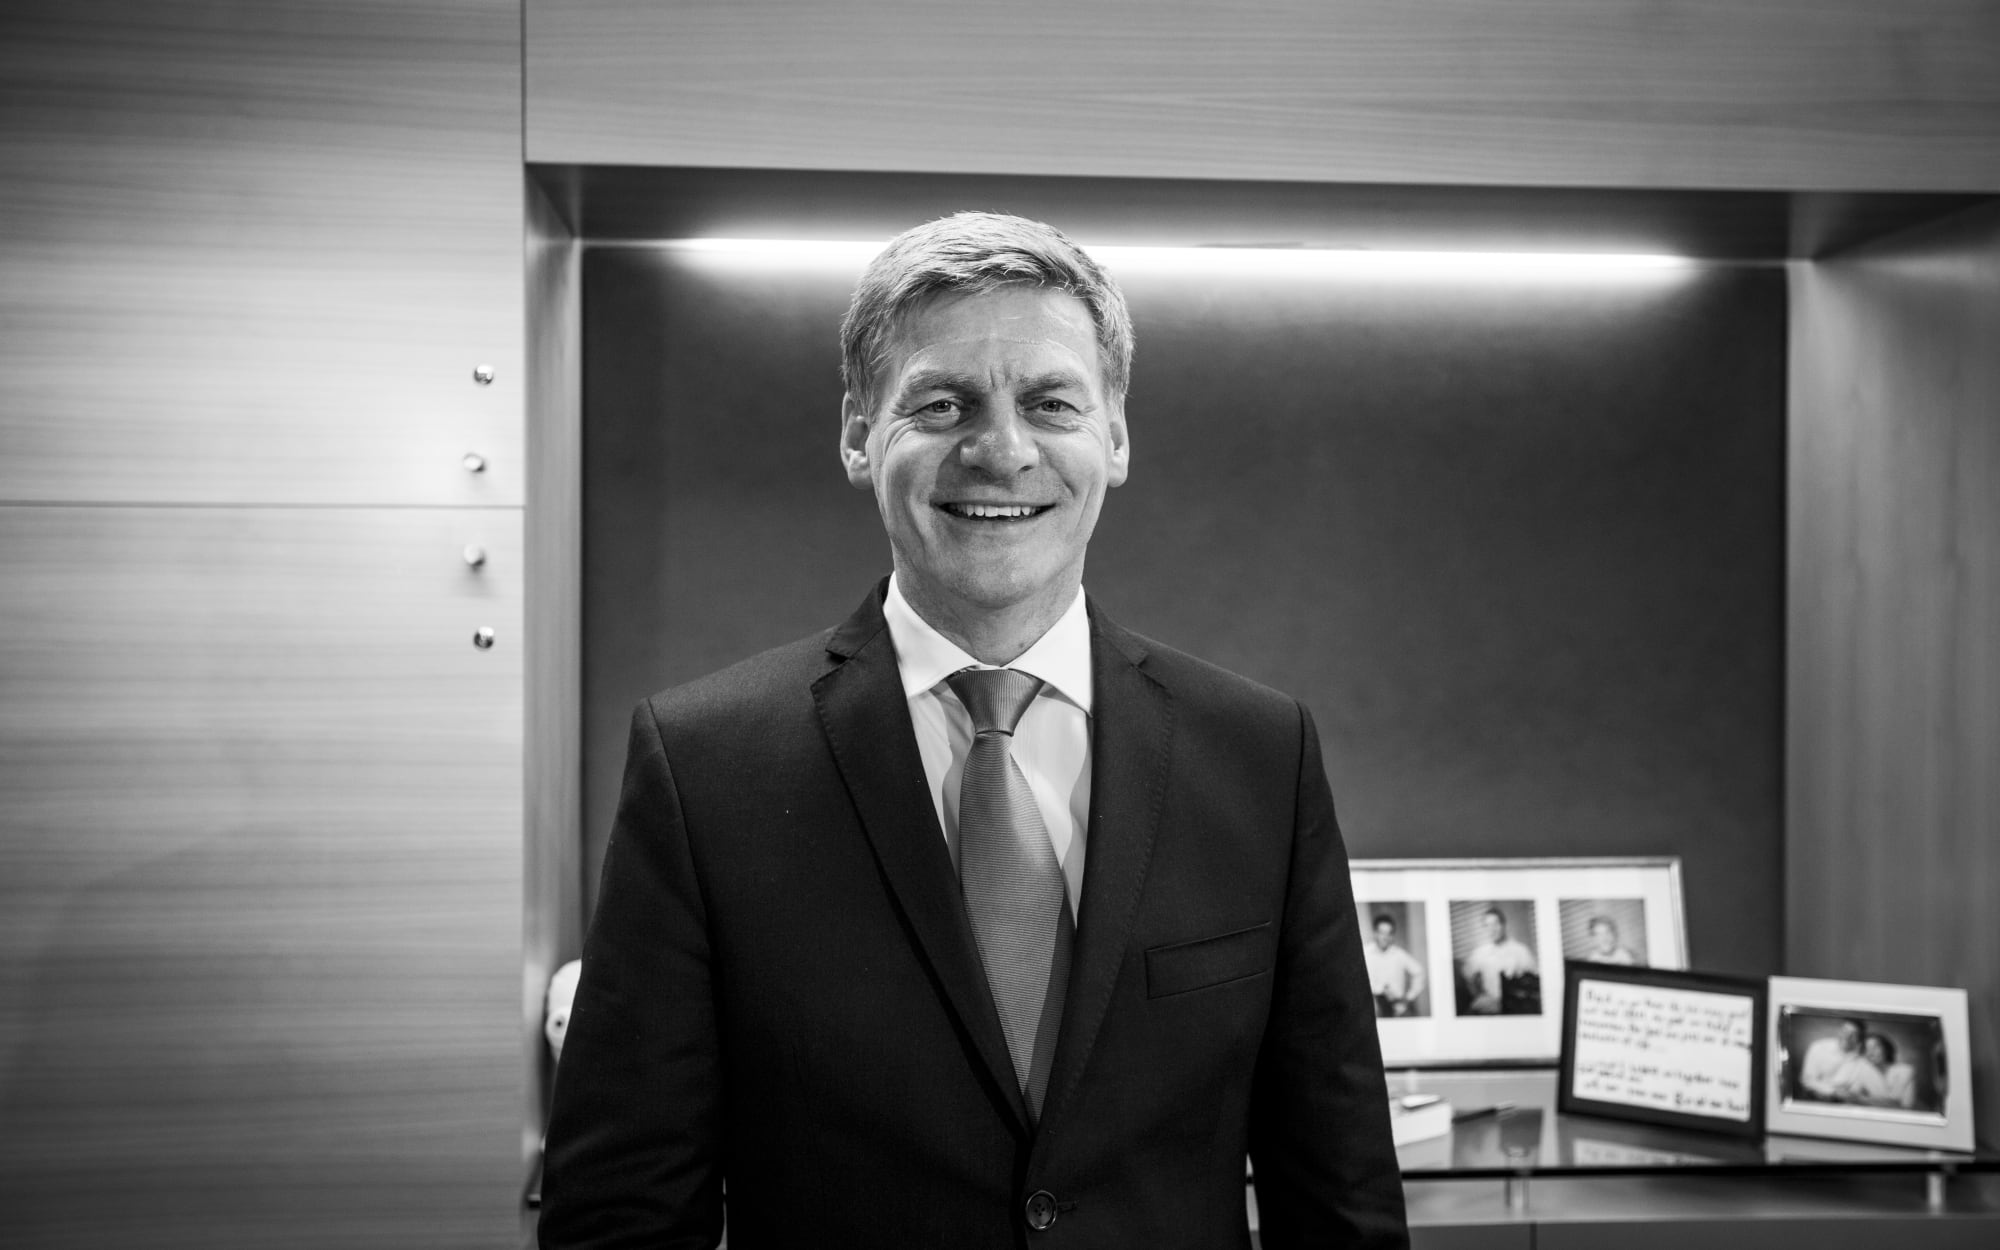 National Party leader Bill English